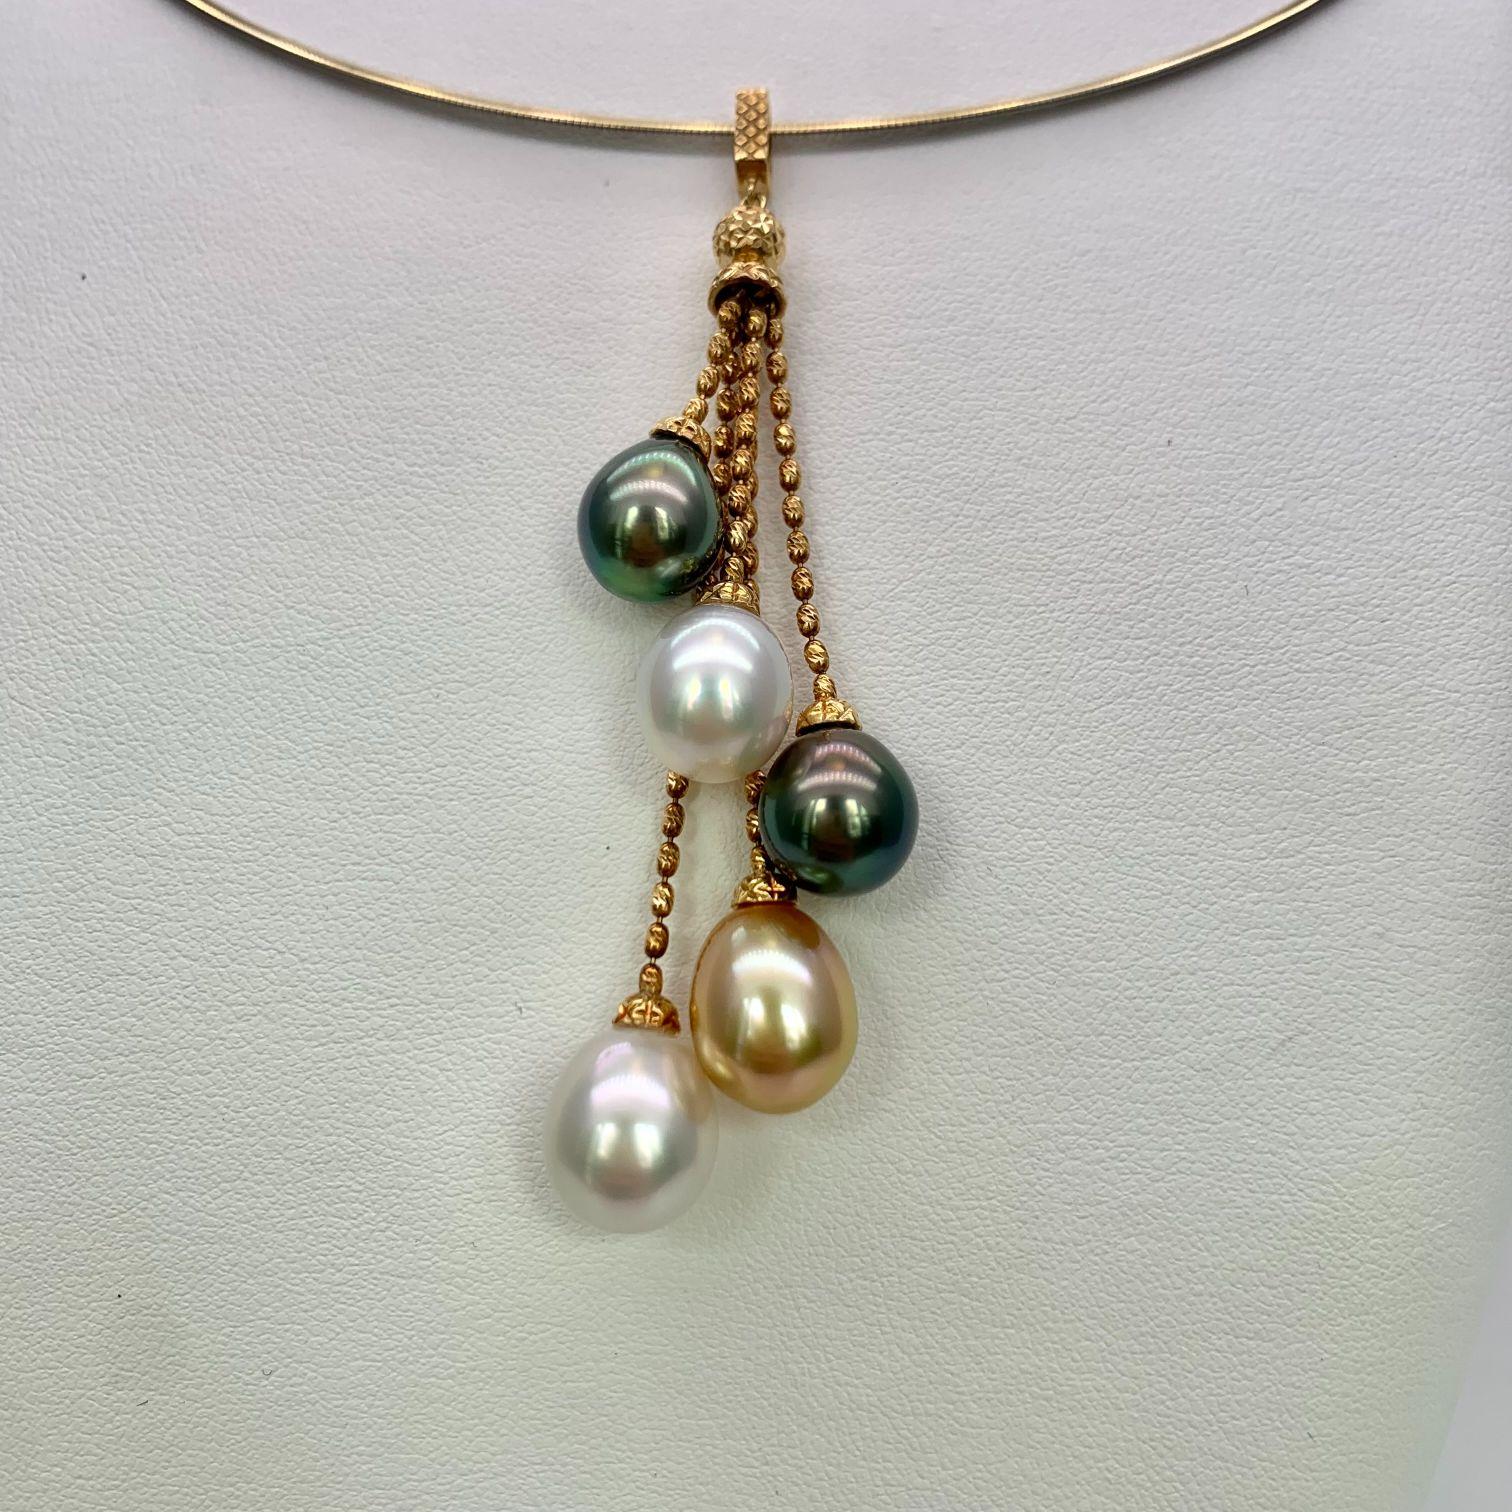 Our popular Pearl FALCO Art & Design Series. Shizuku 雫.‘Shizuku’ Means ‘Dew Drop’ in Japanese, honoring the Ancient Romans who thought of Pearls as dew drops from the moon, or ‘Moon Drops.’ 

6 White Grey and Gold Teardrop-Shaped South Sea Pearls